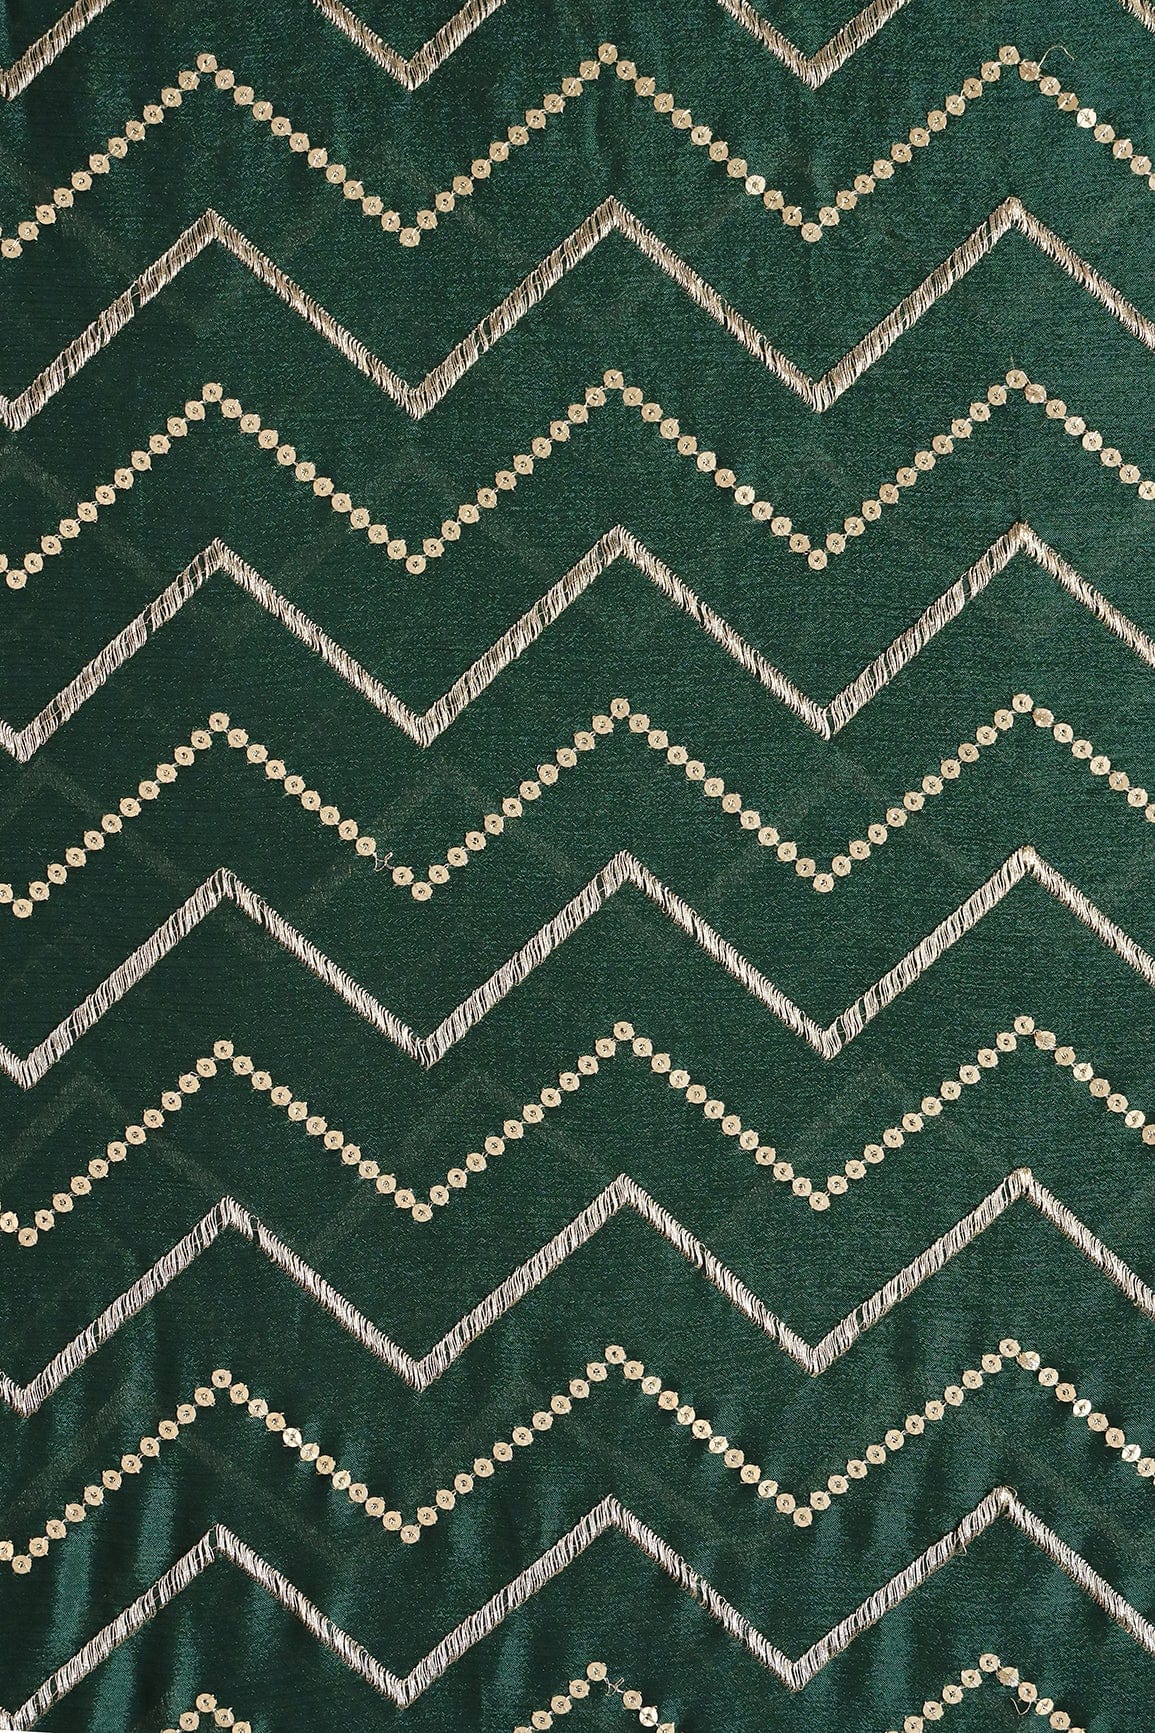 doeraa Embroidery Fabrics 2 Meter Cut Piece Of Gold Zari With Gold Sequins Chevron Embroidery Work On Bottle Green Chinnon Chiffon Fabric